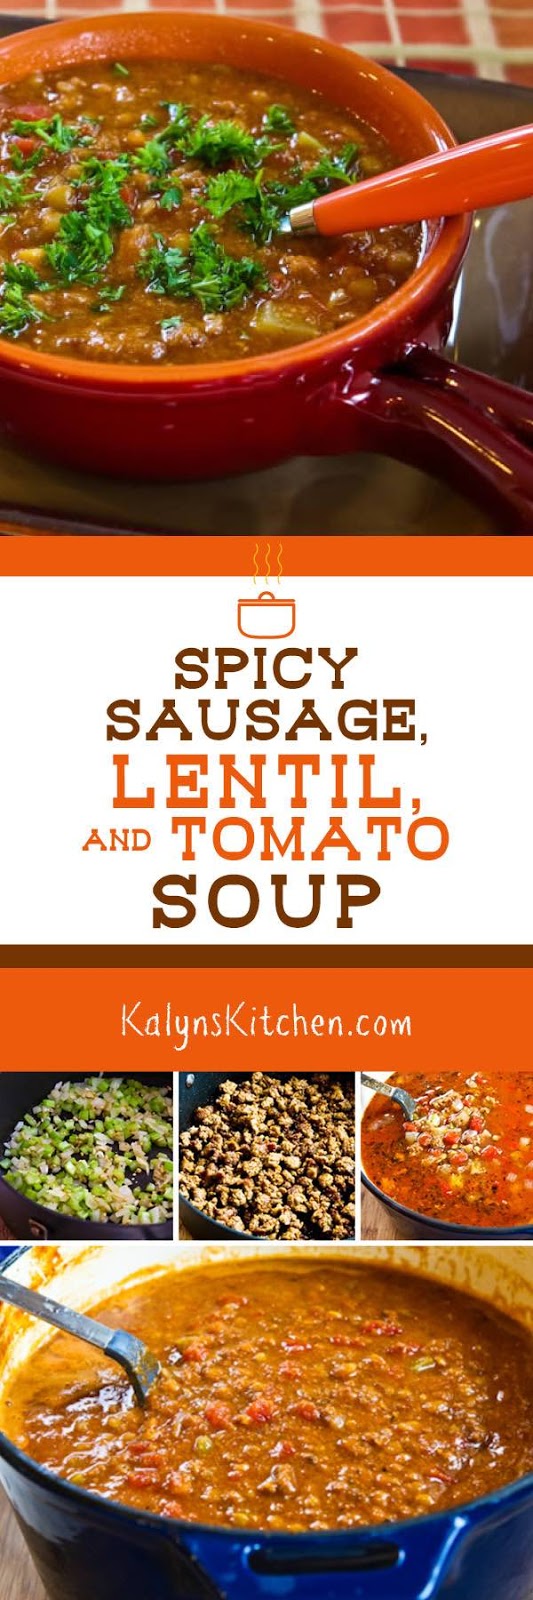 Spicy Sausage, Lentil, and Tomato Soup - Kalyn's Kitchen